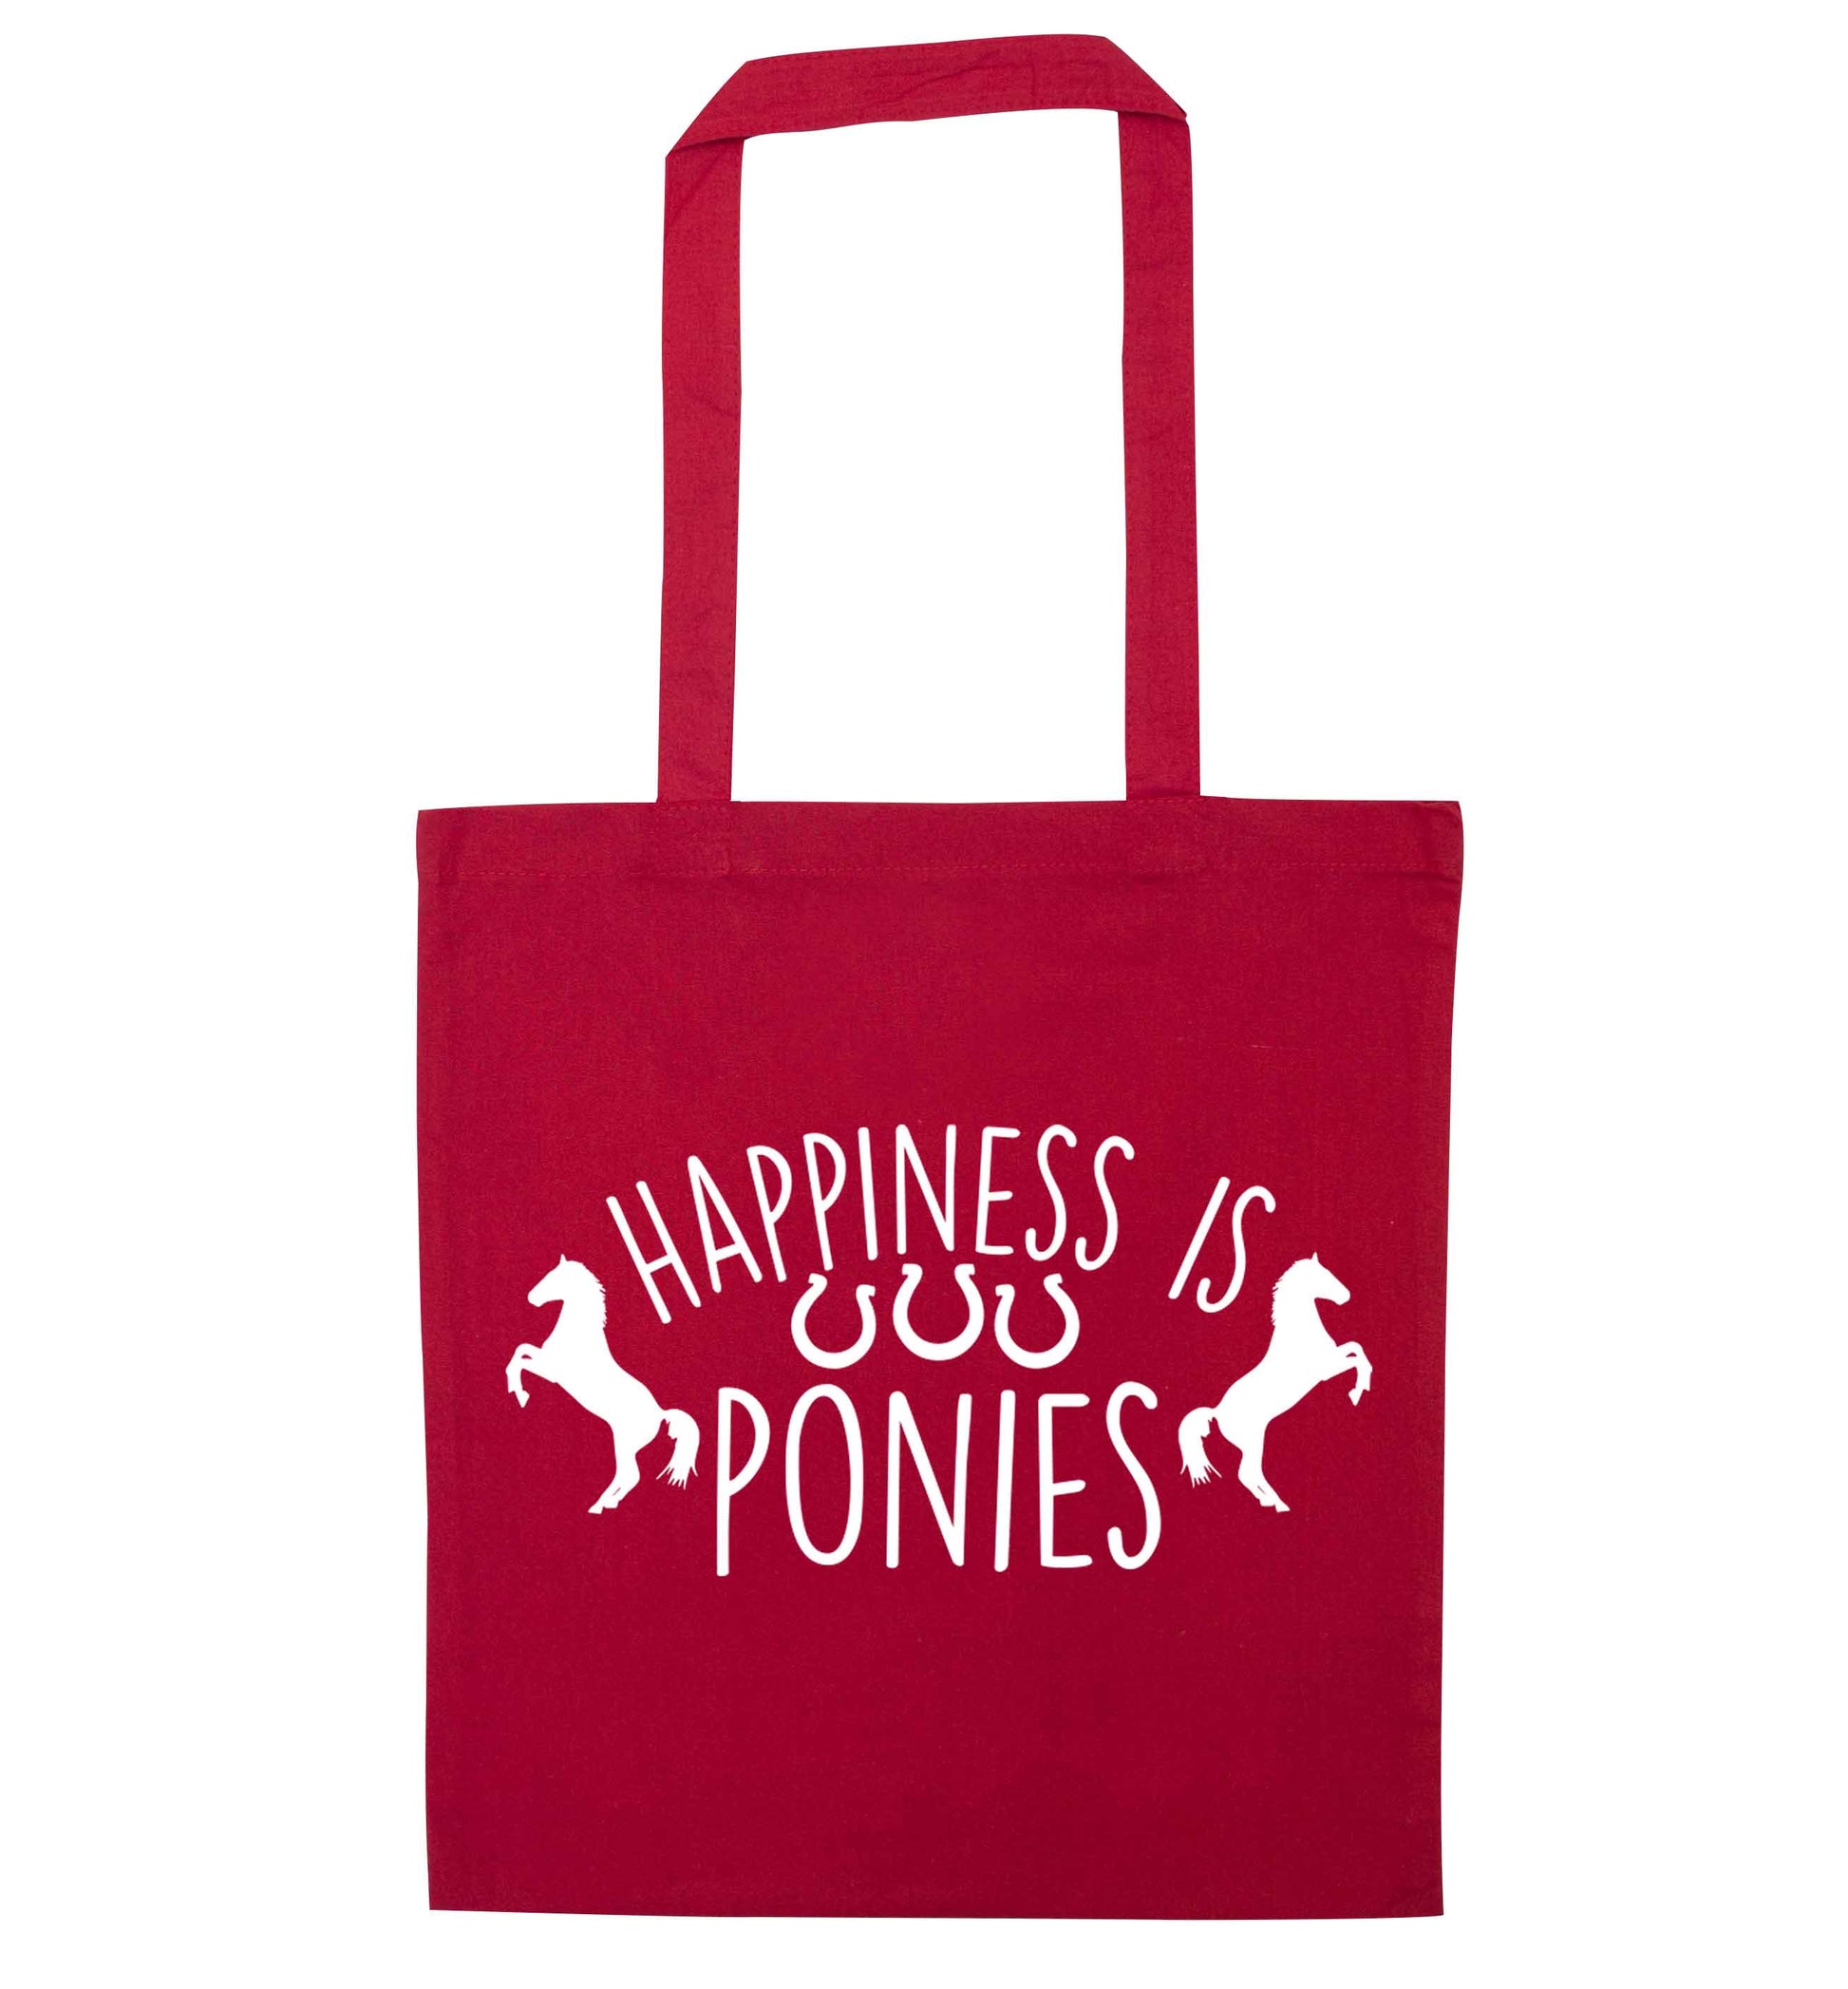 Happiness is ponies red tote bag